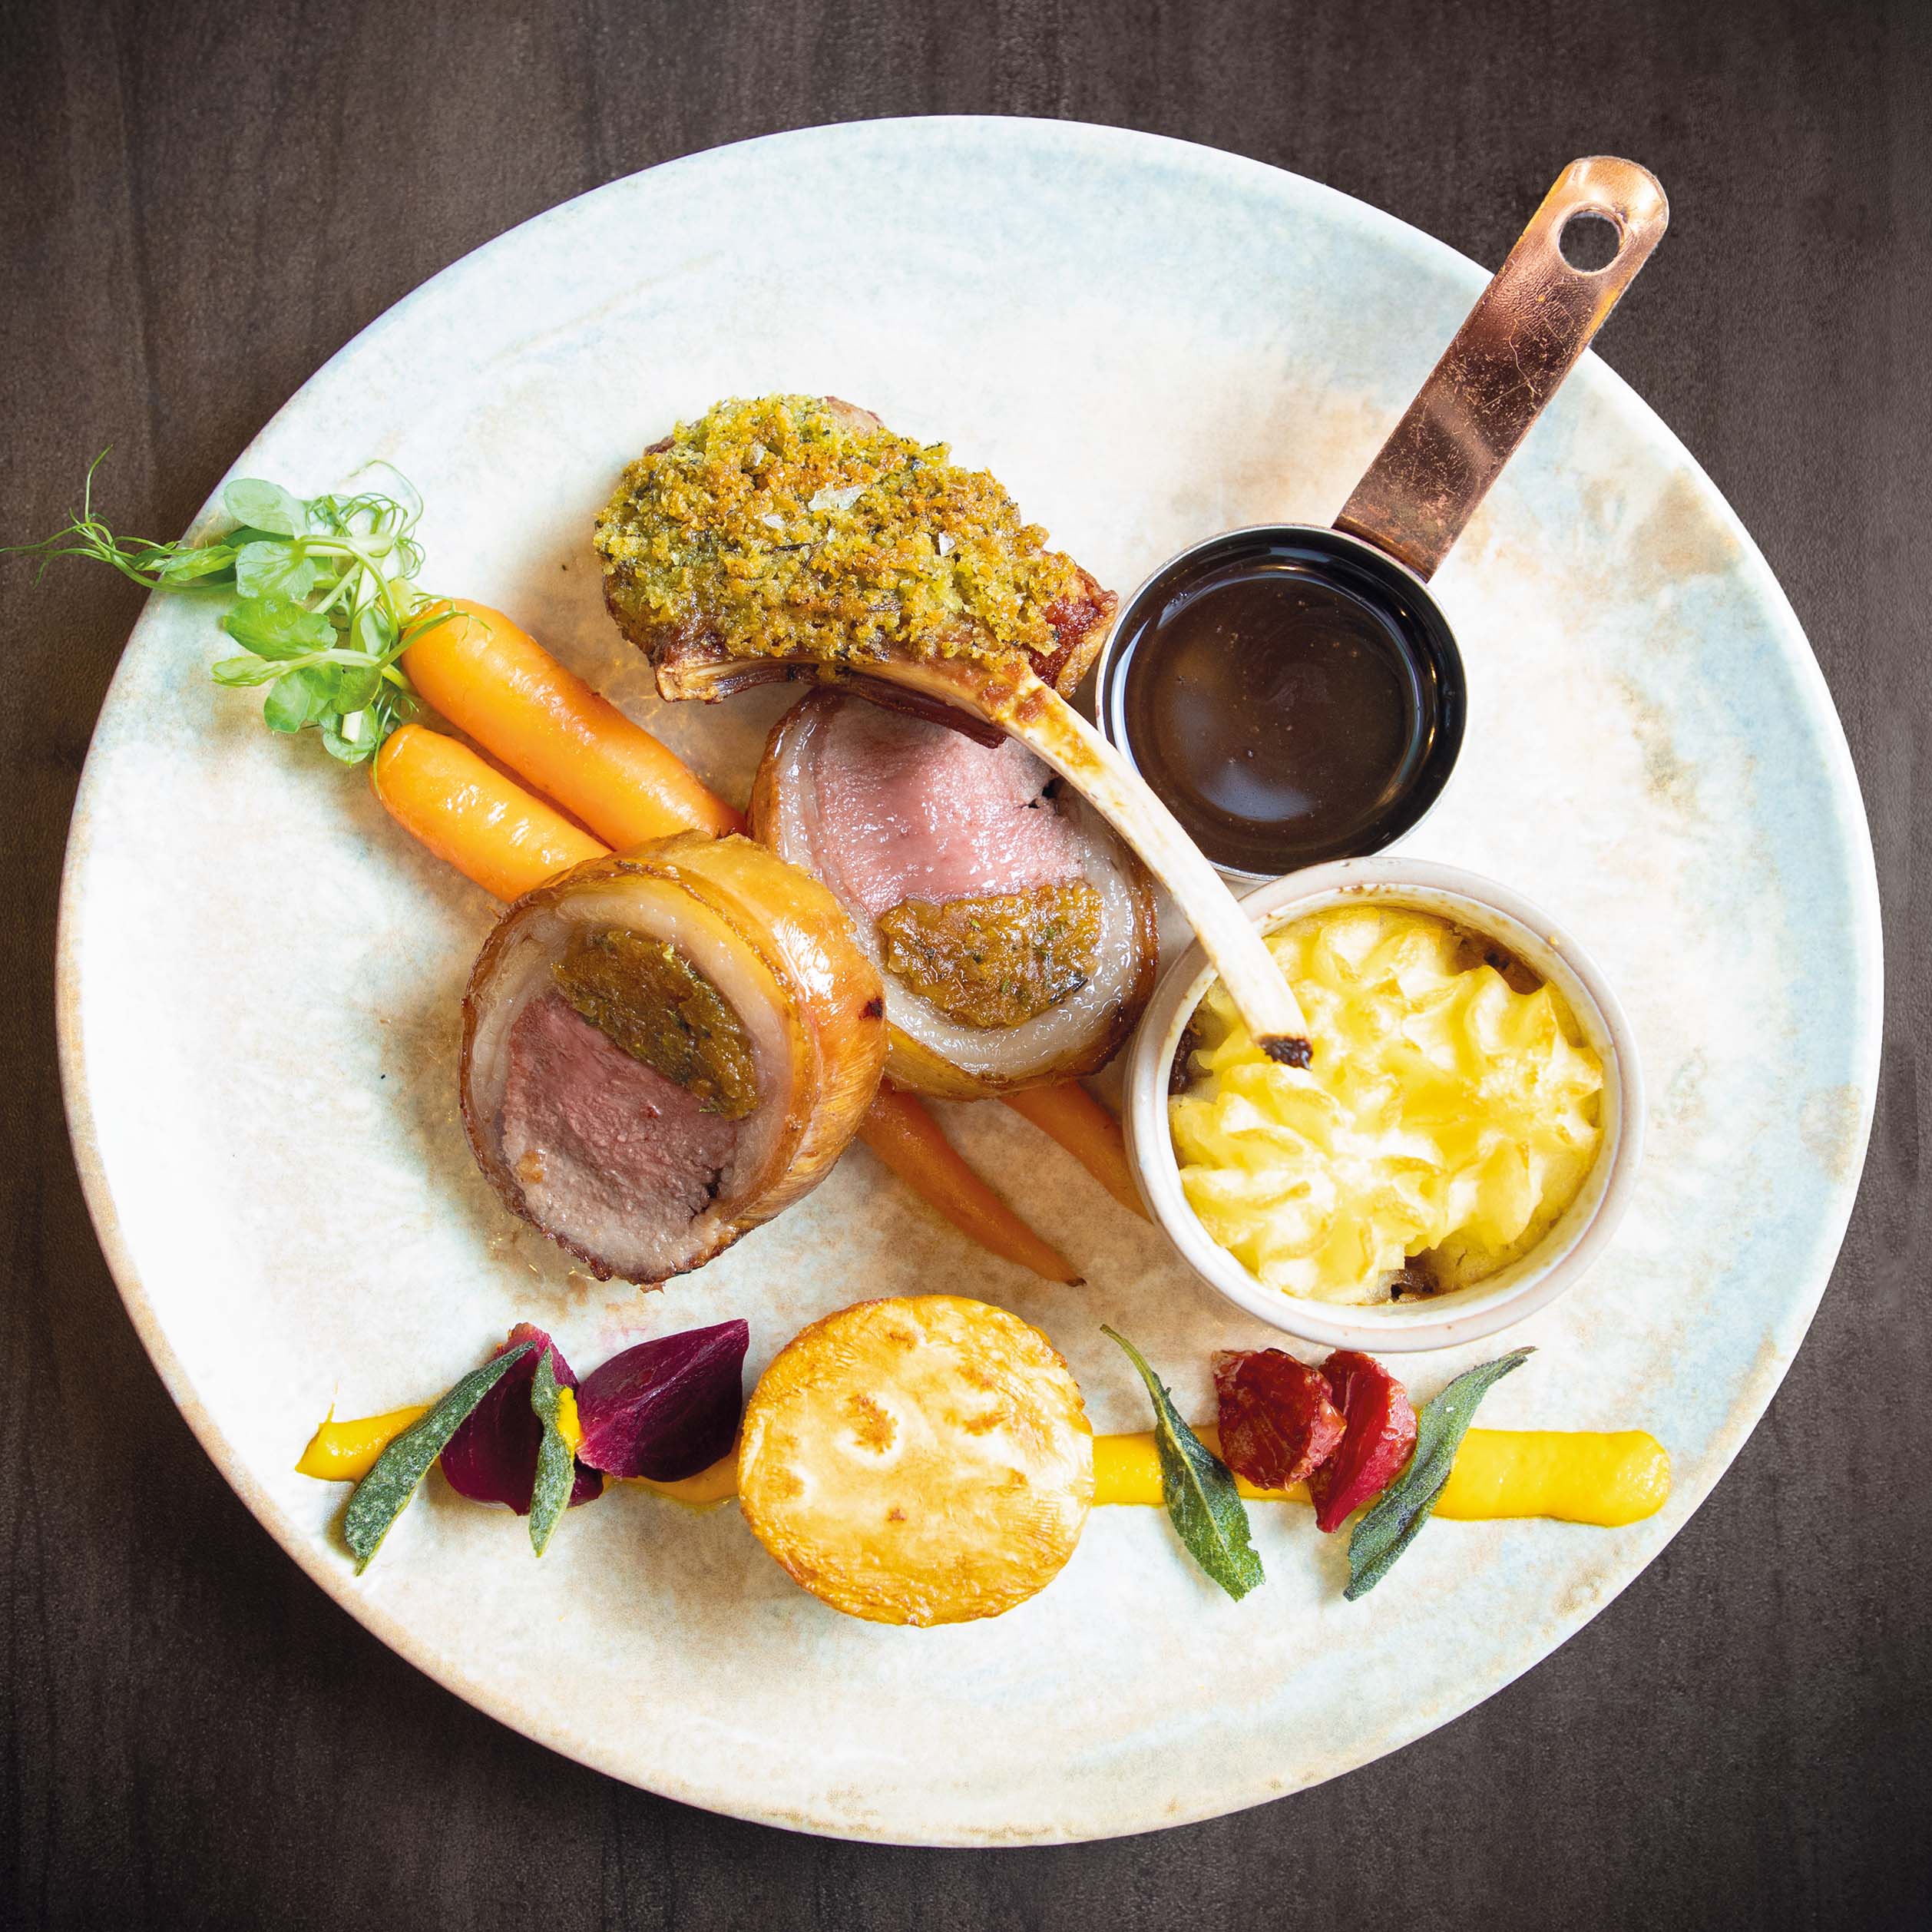 Trio of Knead Farm Lamb with pulled shoulder of Lamb Shepherd’s pie, herb crusted lamb chop & rolled loin of lamb stuffed with rosemary and apricots, rainbow beets, carrot puree and celeriac fondant, £21.95